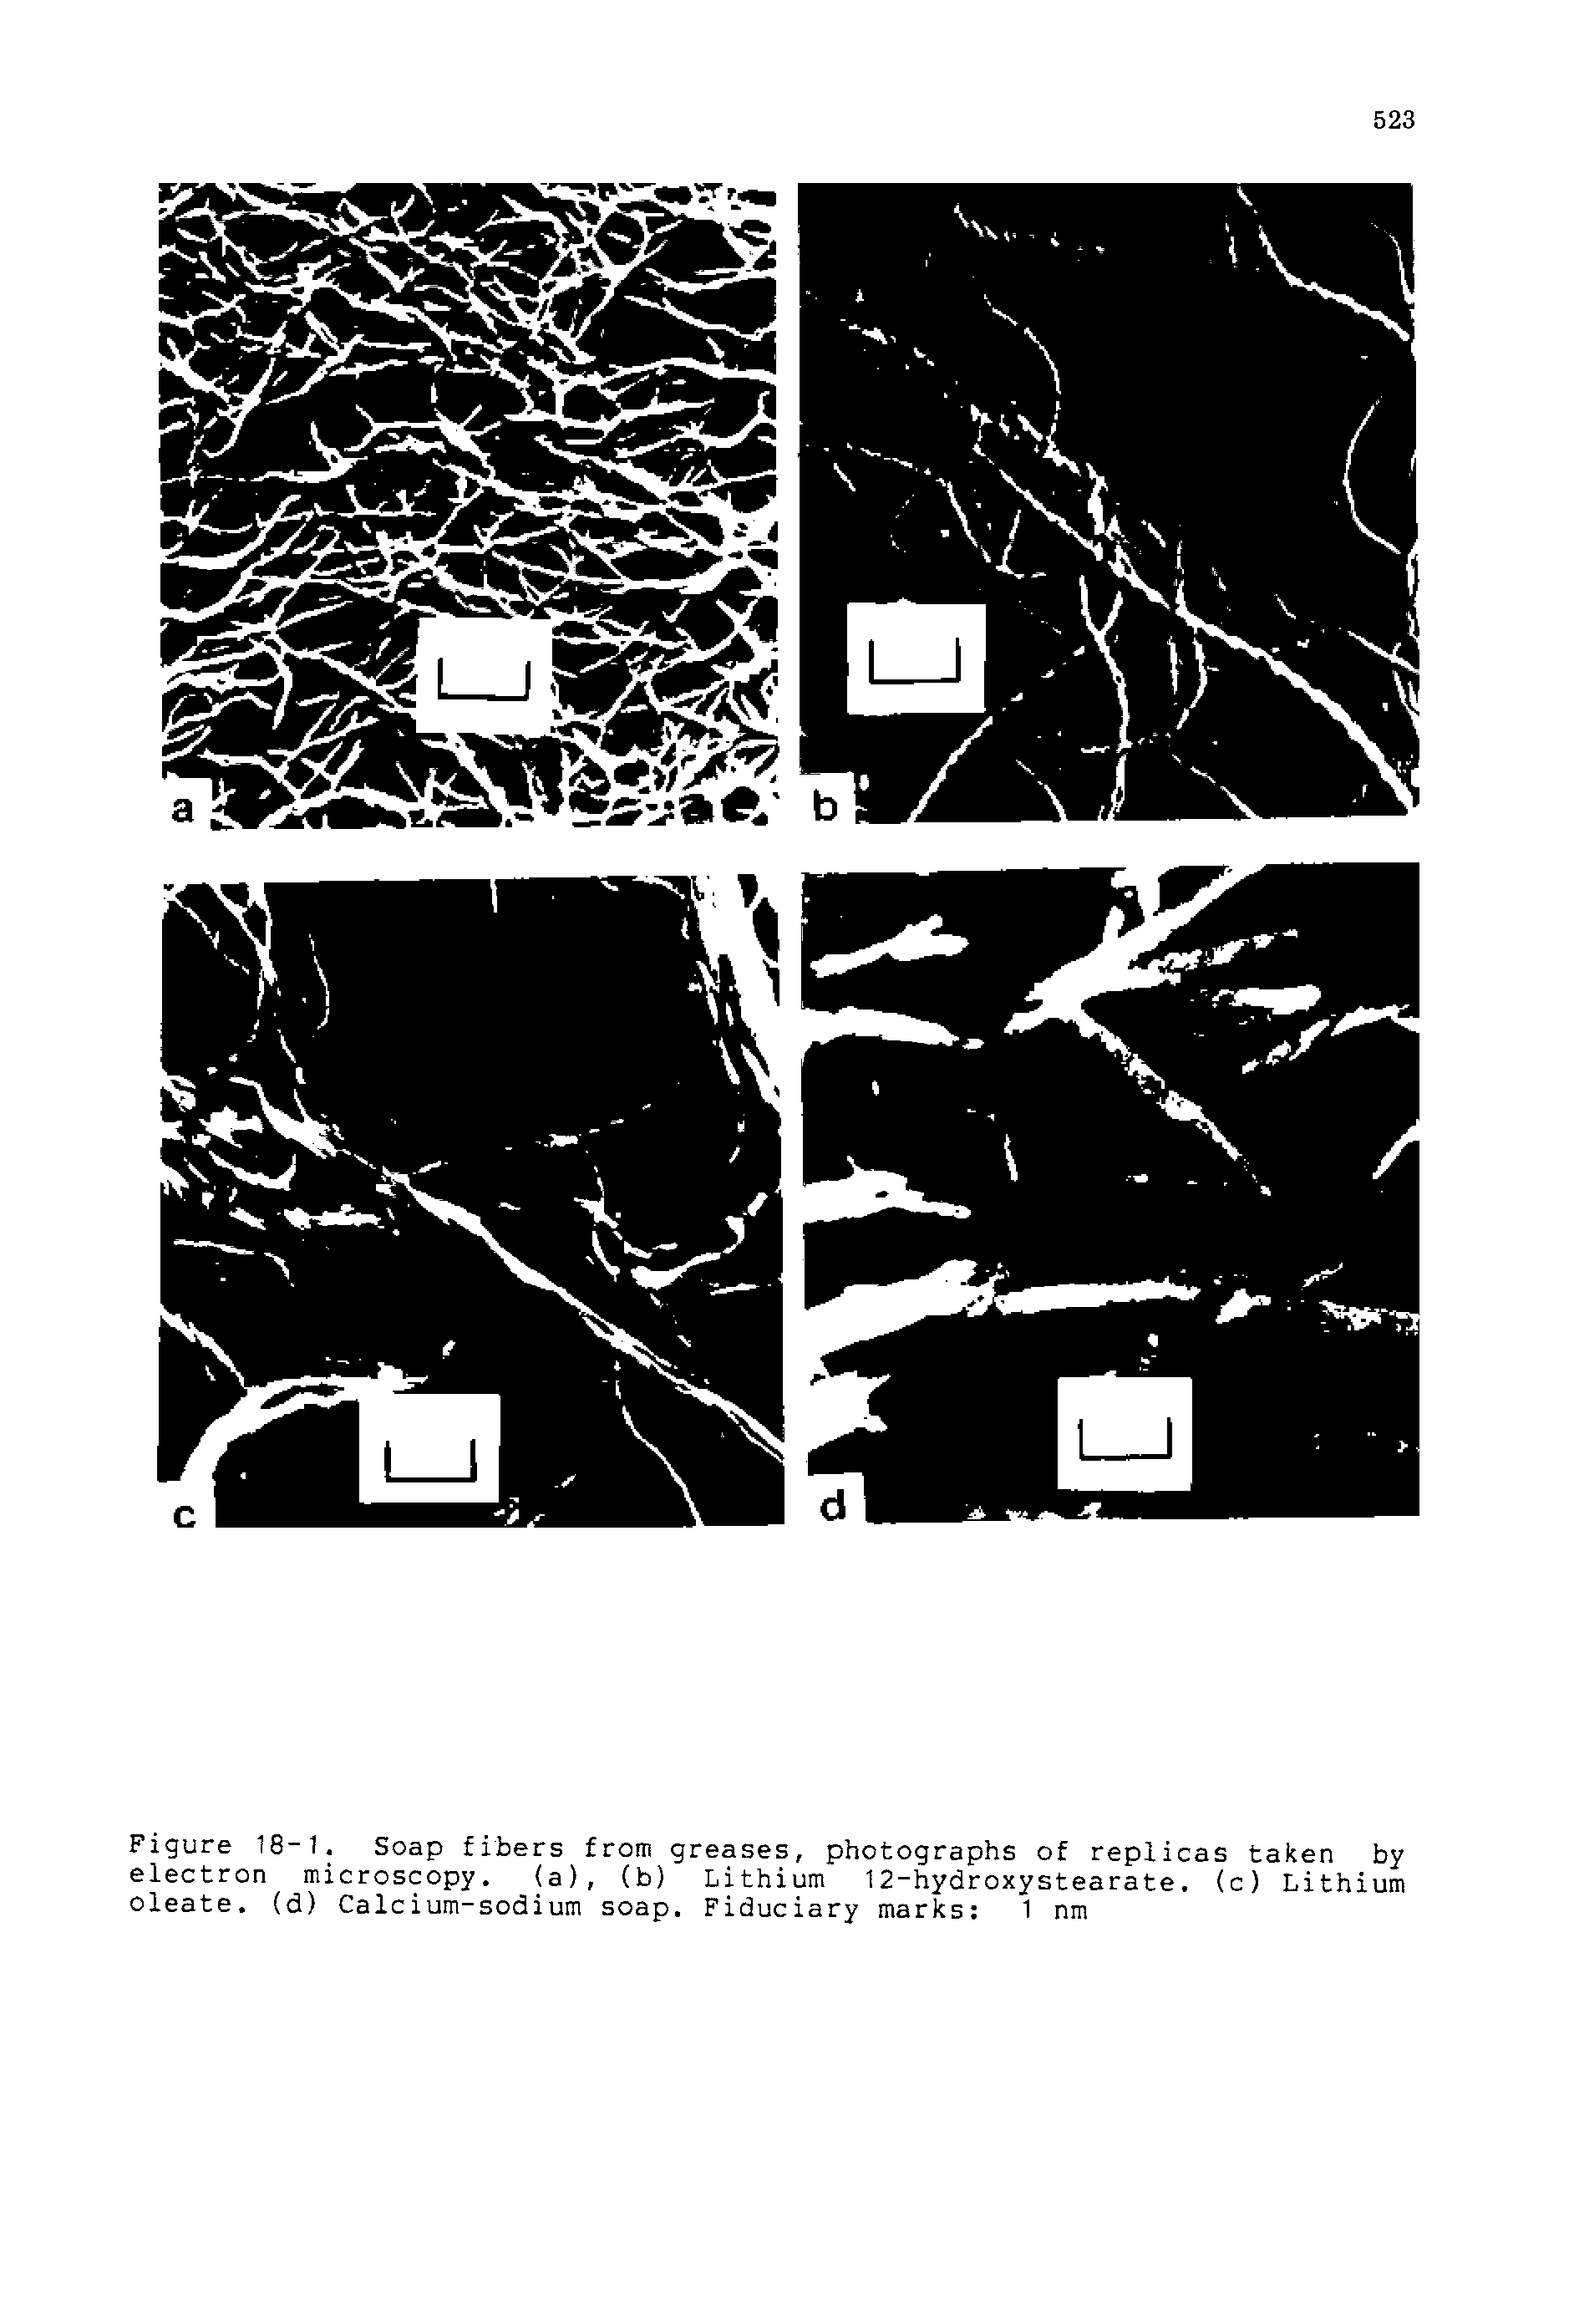 Figure 18-1. Soap fibers from greases, photographs of replicas taken by electron microscopy. (a), (b) Lithium 12-hydroxystearate. (c) Lithium oleate. (d) Calcium-sodium soap. Fiduciary marks 1 nm...